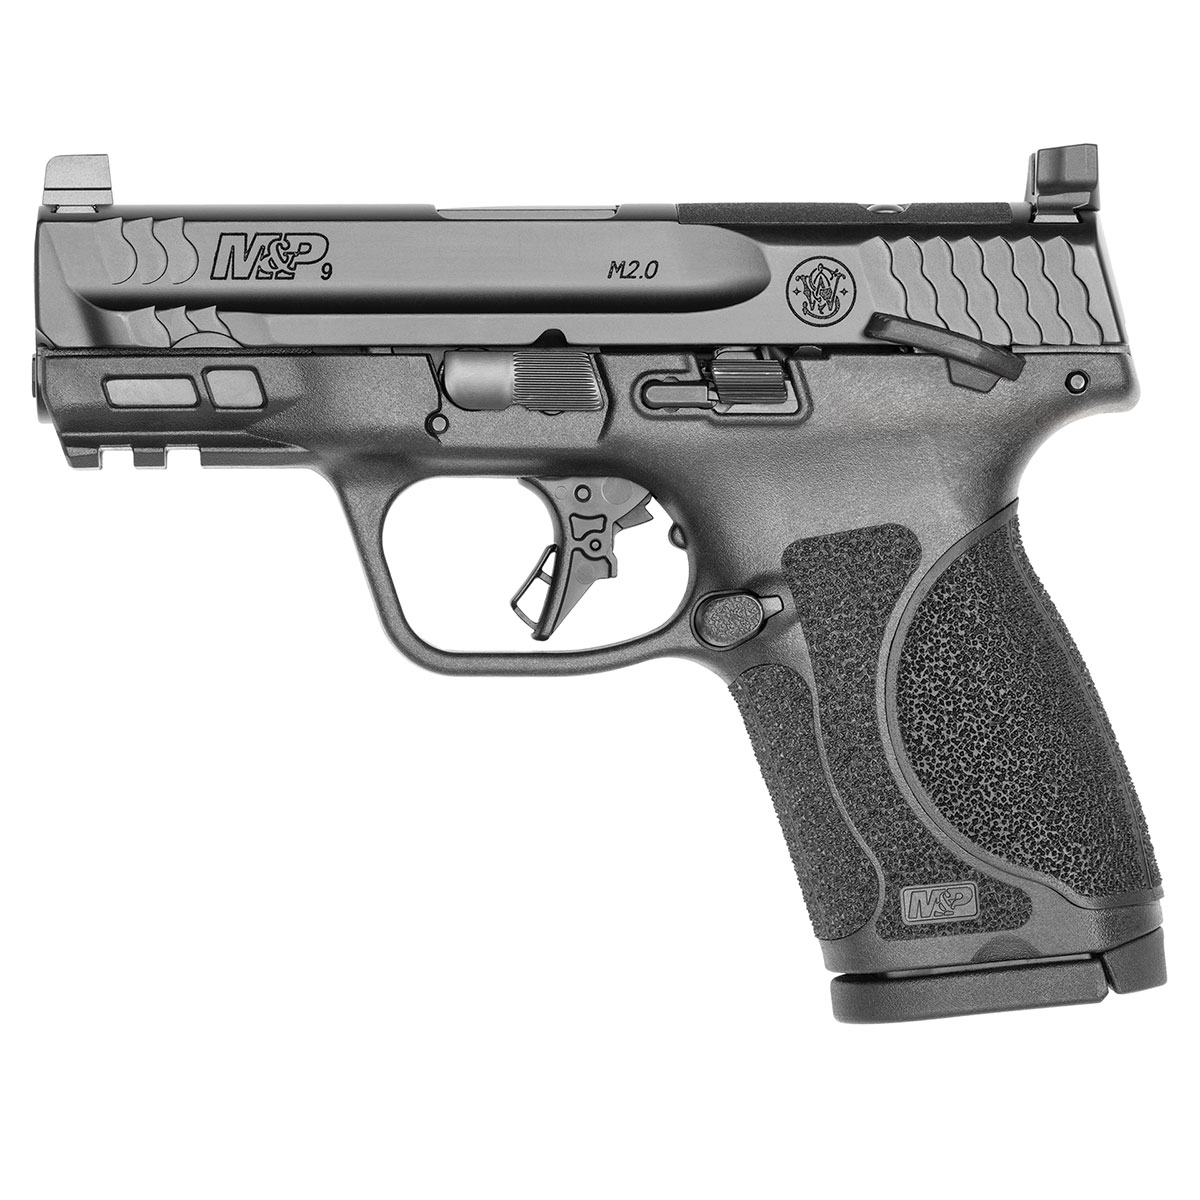 SMITH & WESSON - M&P 9 M2.0 COMPACT OPTIC READY 9MM LUGER HANDGUN